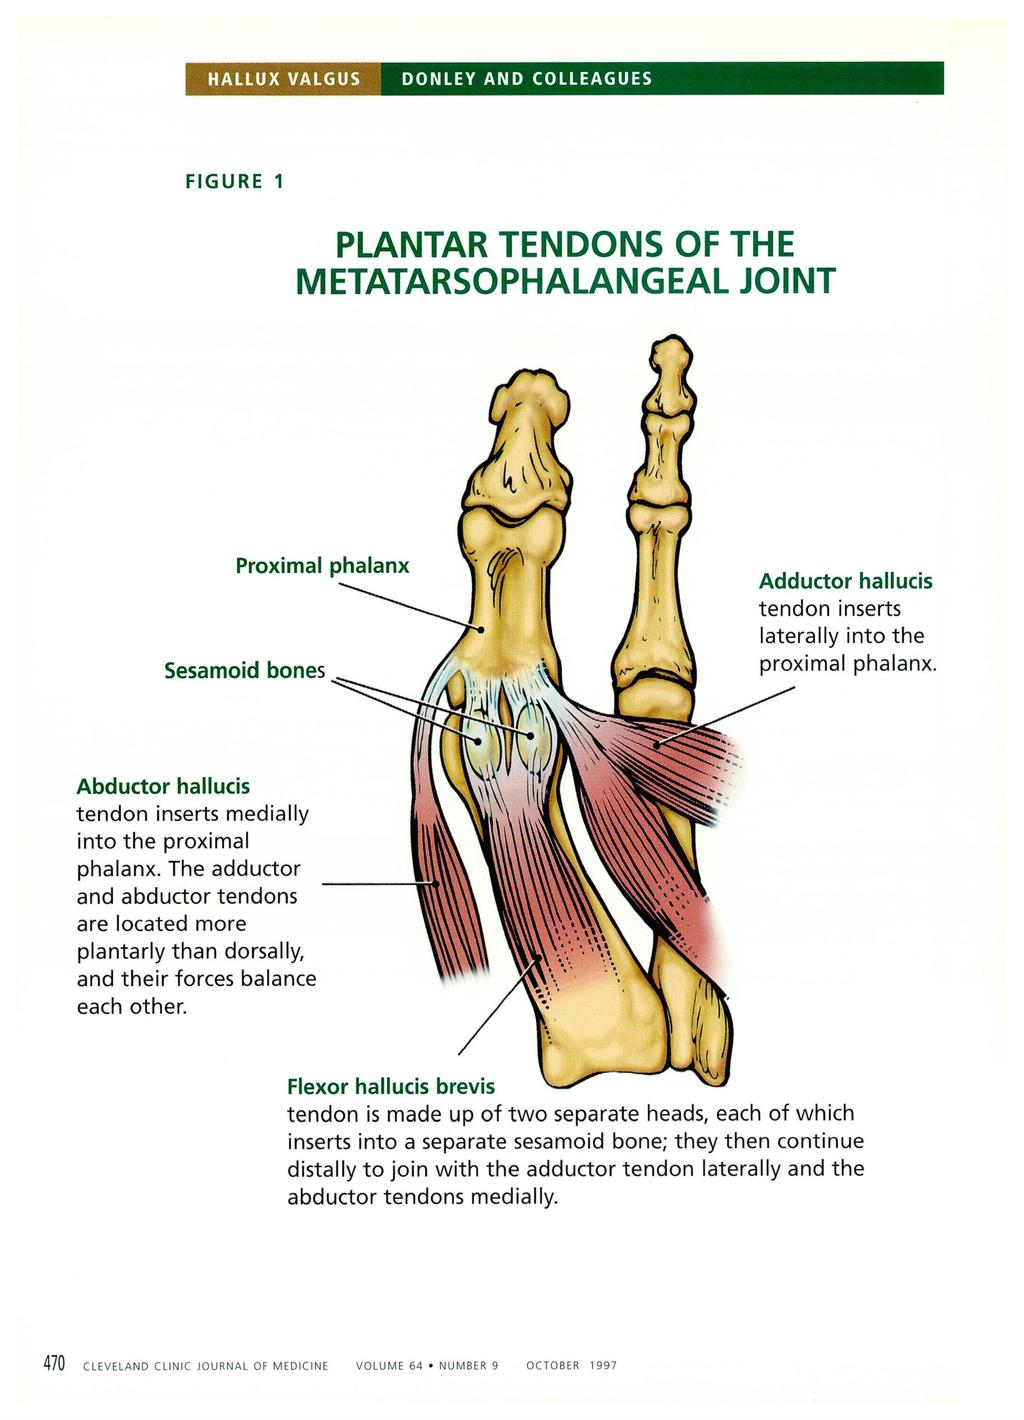 HALLUX VALGUS DONLEY AND COLLEAGUES FIGURE 1 PLANTAR TENDONS OF THE METATARSOPHALANGEAL JOINT Proximal phalanx Sesamoid bones Adductor hallucis tendon inserts laterally into the proximal phalanx.